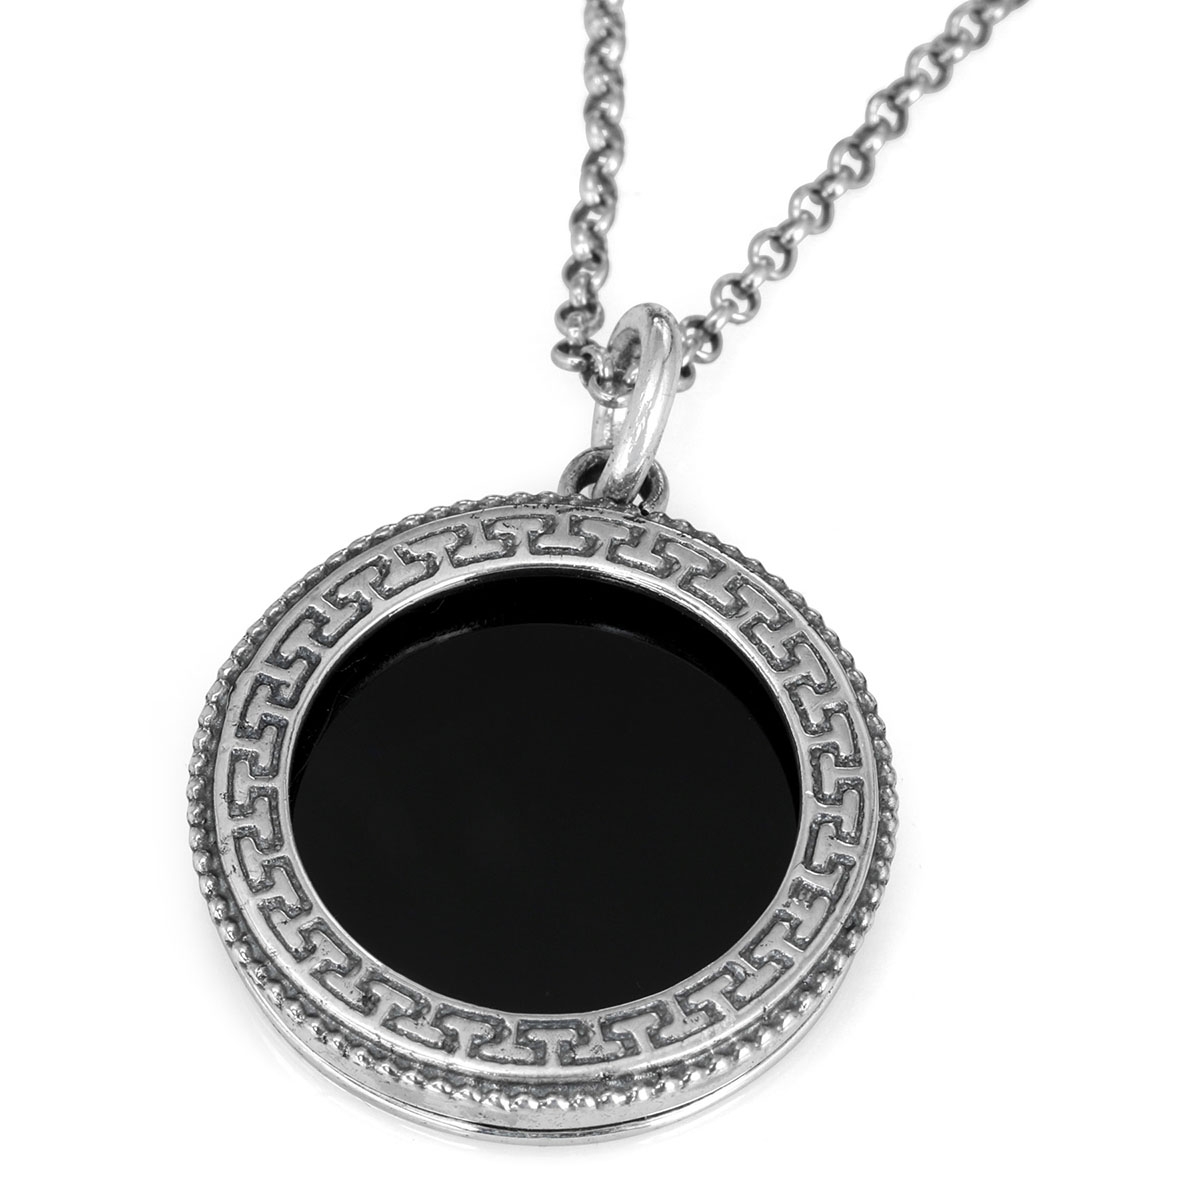 Solid 925 Sterling Silver Thick Men's Necklace With Onyx Stone - 1